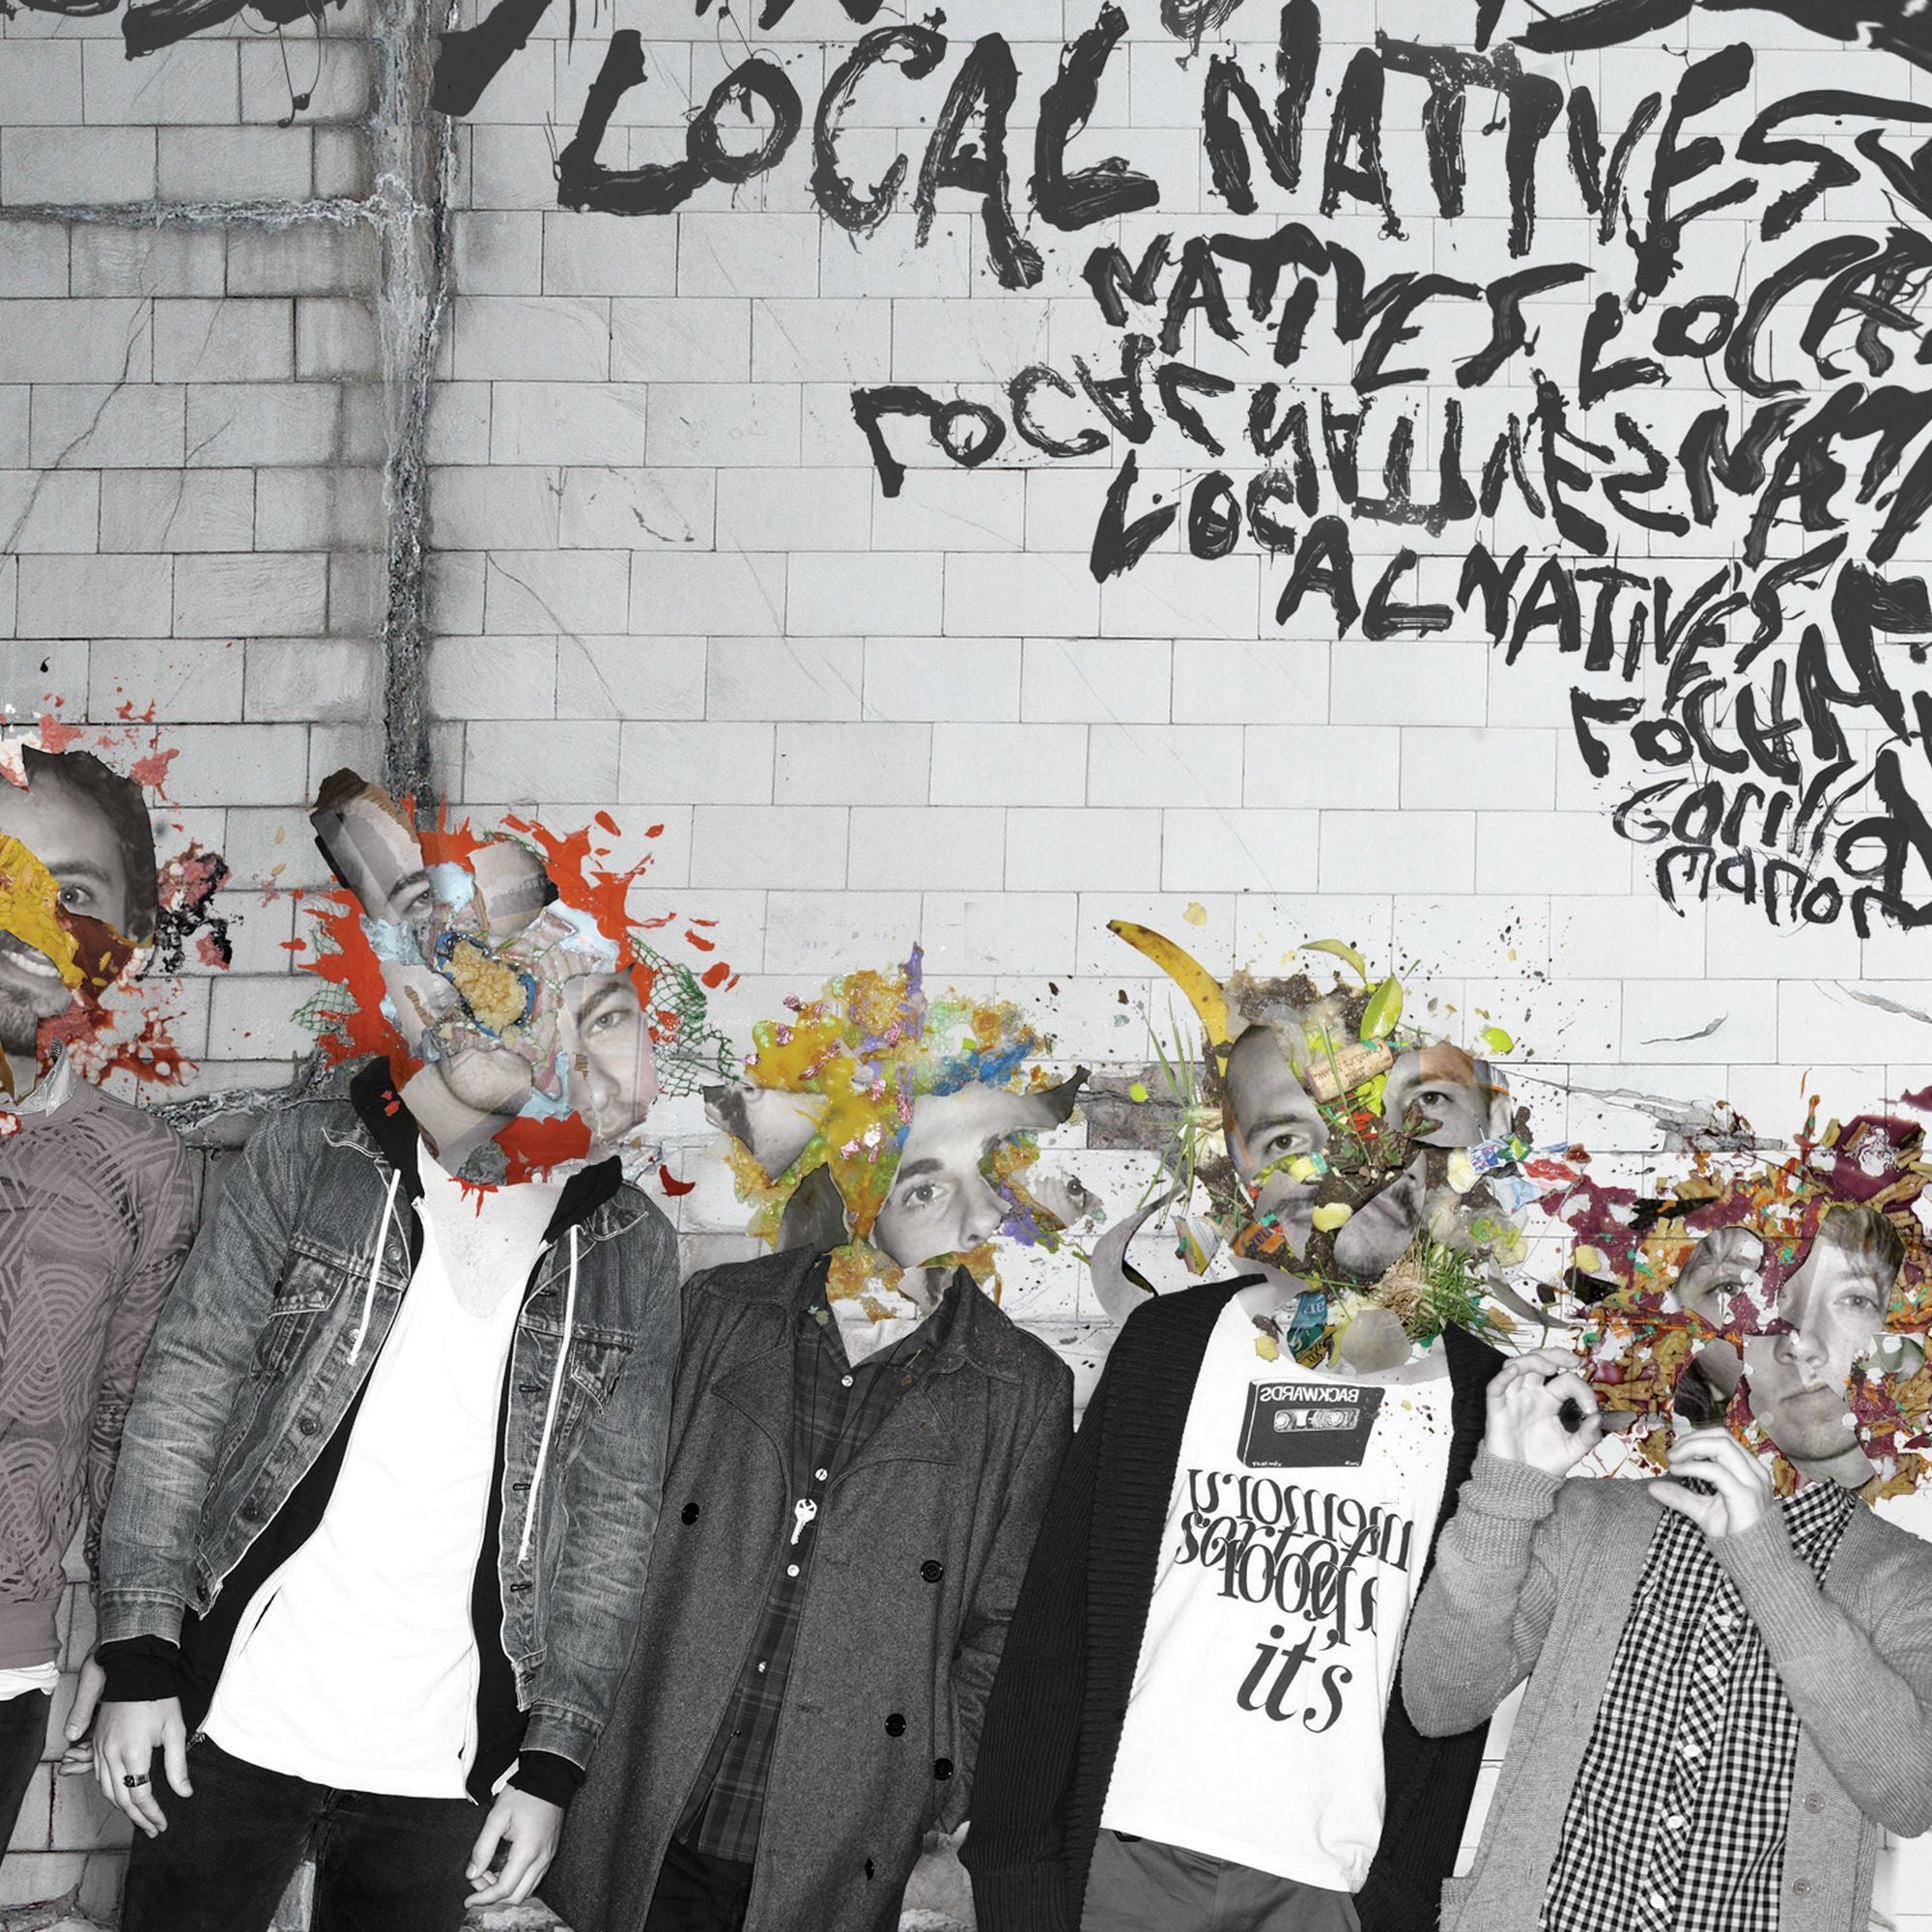 Local Natives ‎– Gorilla Manor - New Vinyl Lp 2018 Frenchkiss Limited Edition 'Ten Bands One Cause' Pressing on Pink Vinyl - Indie Rock